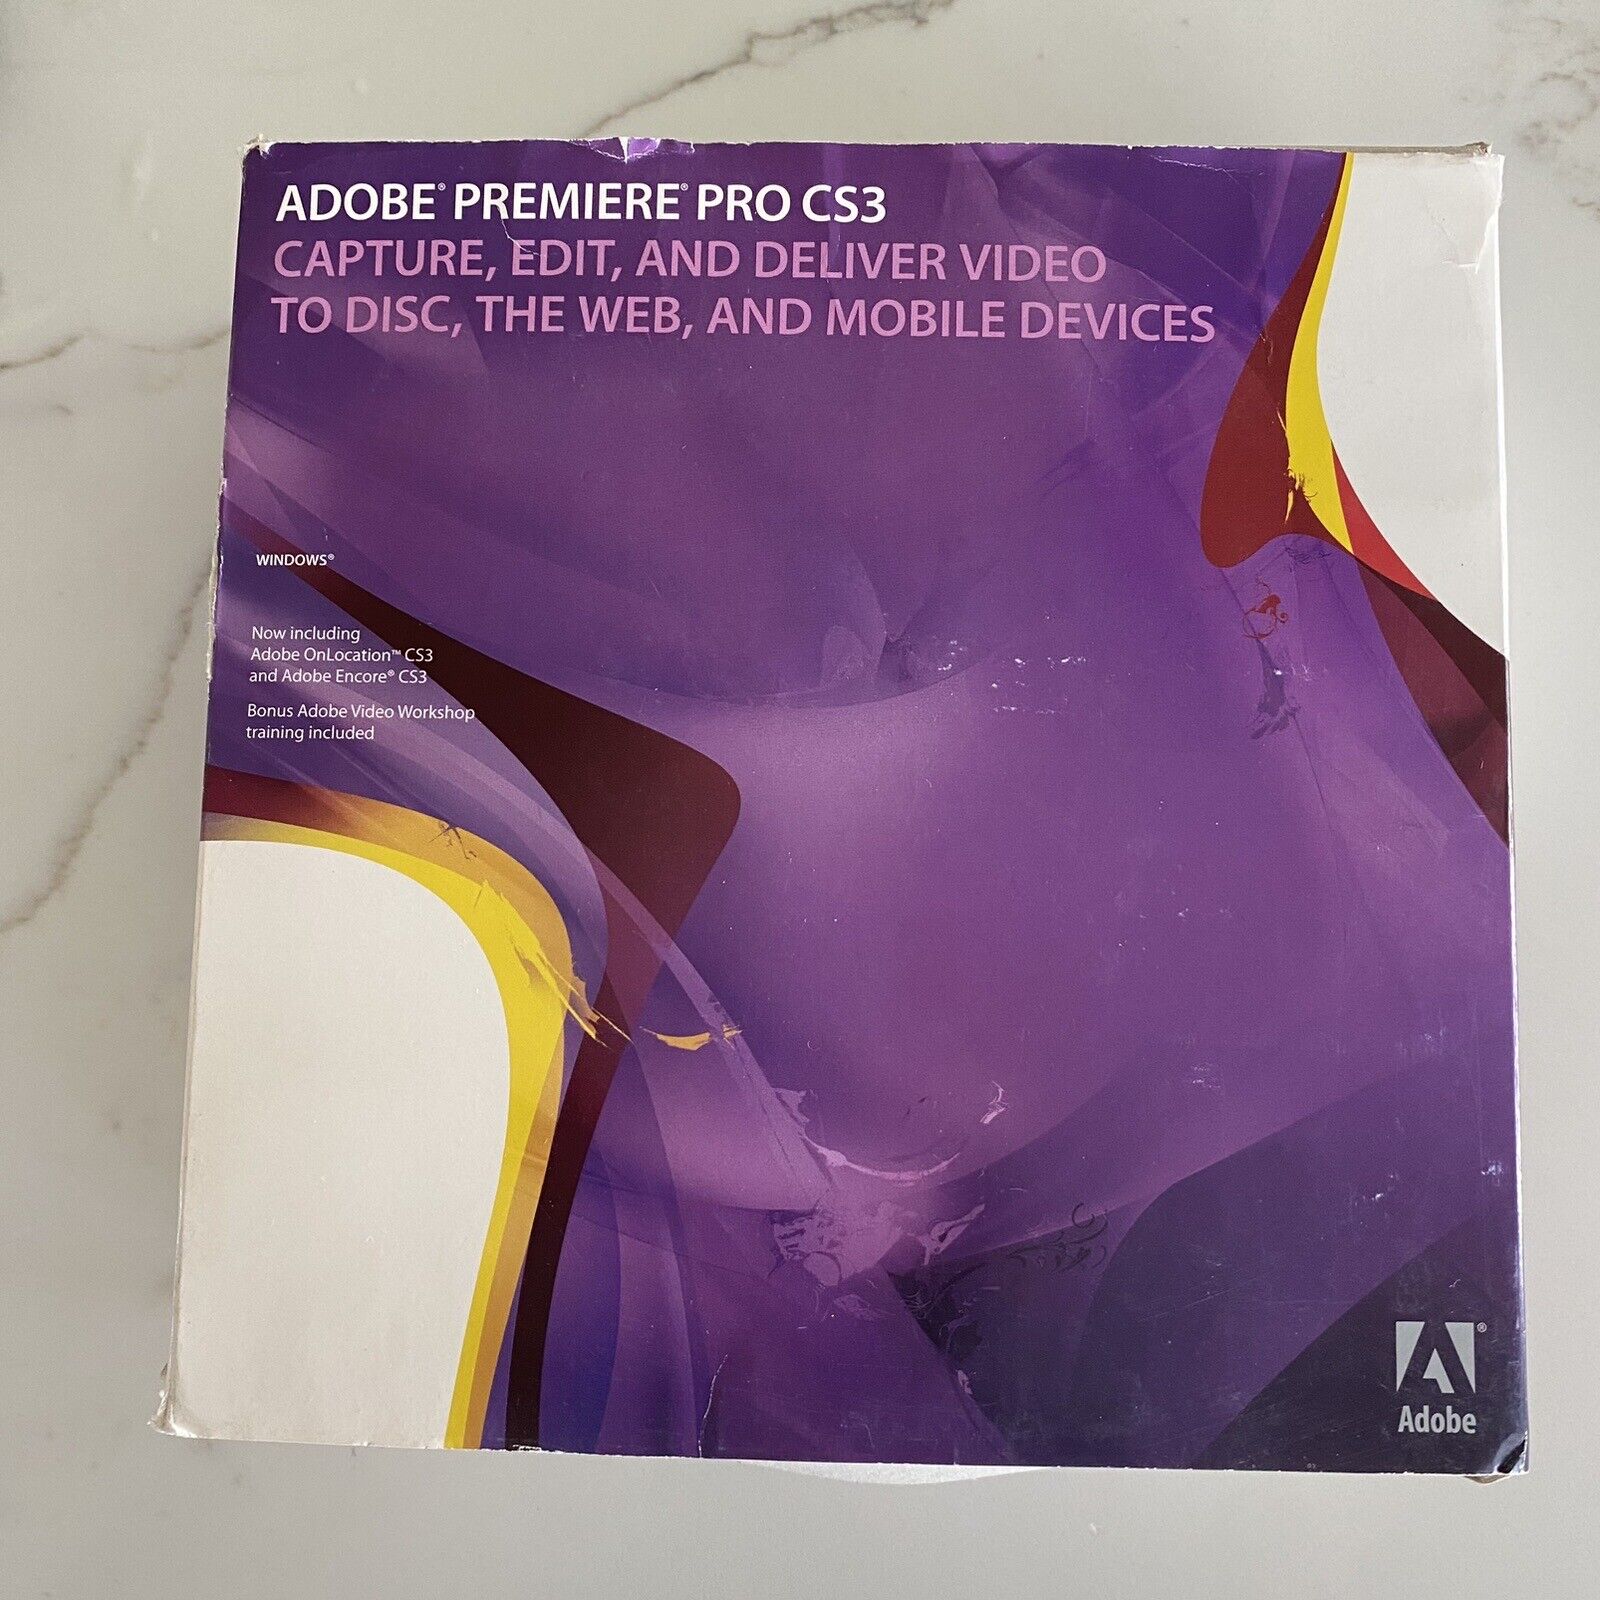 Adobe Premiere Pro CS3 Retail for Windows with Serial Number (WIN 8 or Earlier)